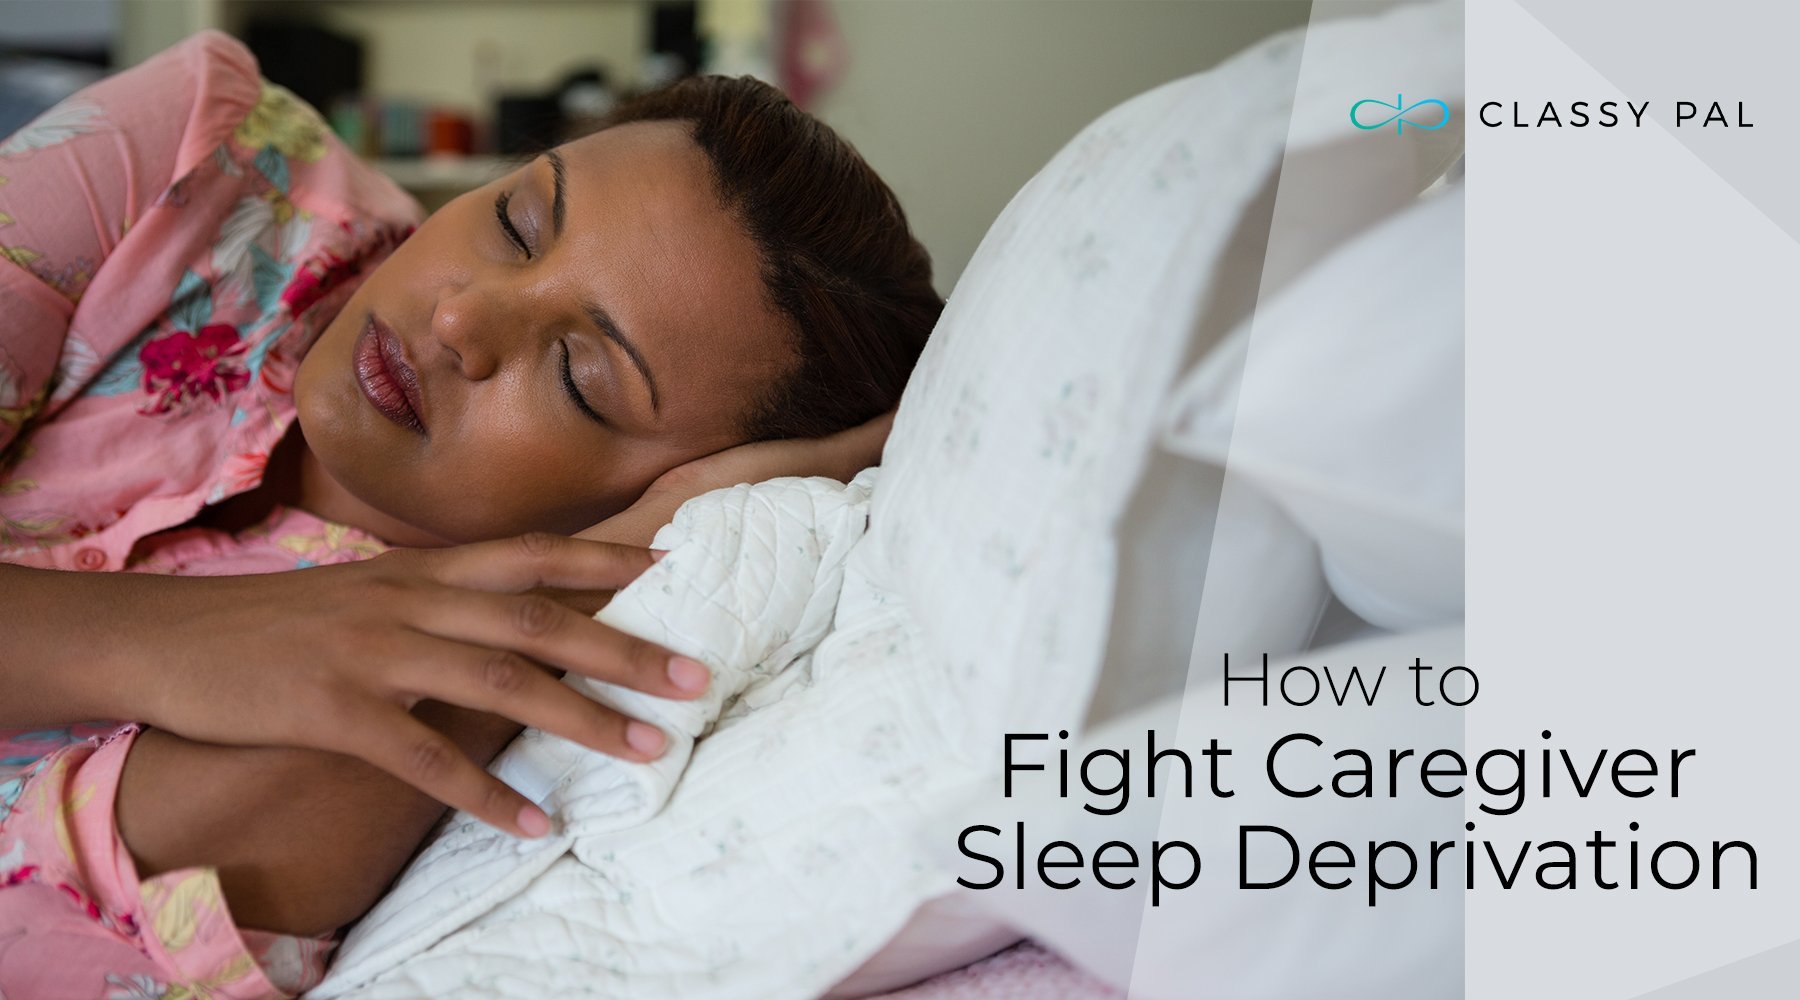 Getting Your Zzzz’s: How To Guard Against Care-giver Sleep Deprivation | Classy Pal